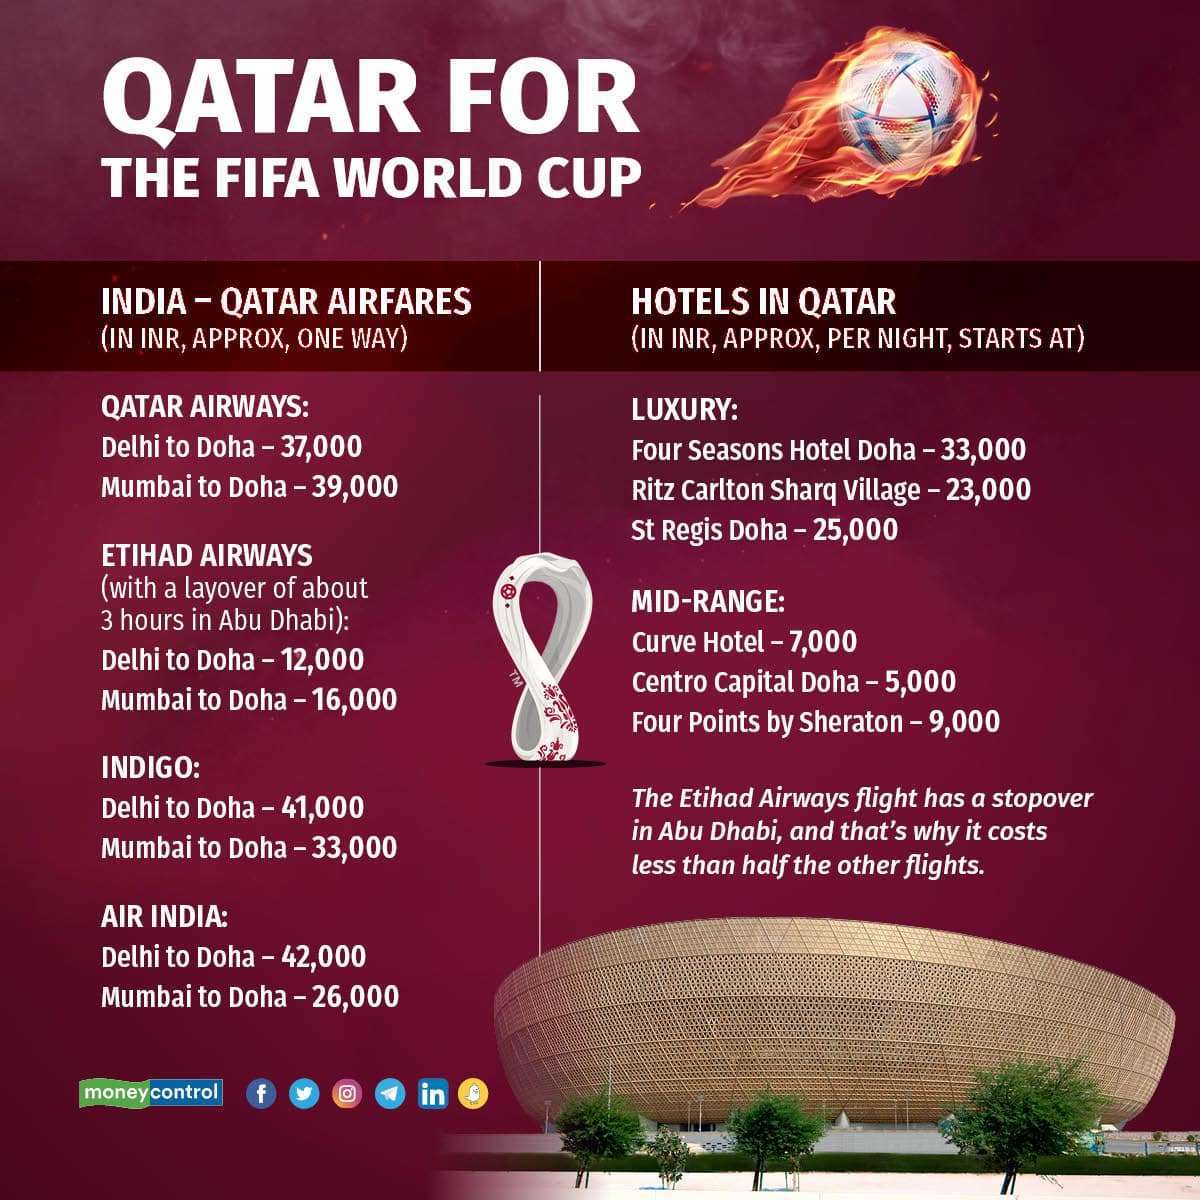 Qatar flights and stay options for people going for FIFA World Cup 2022